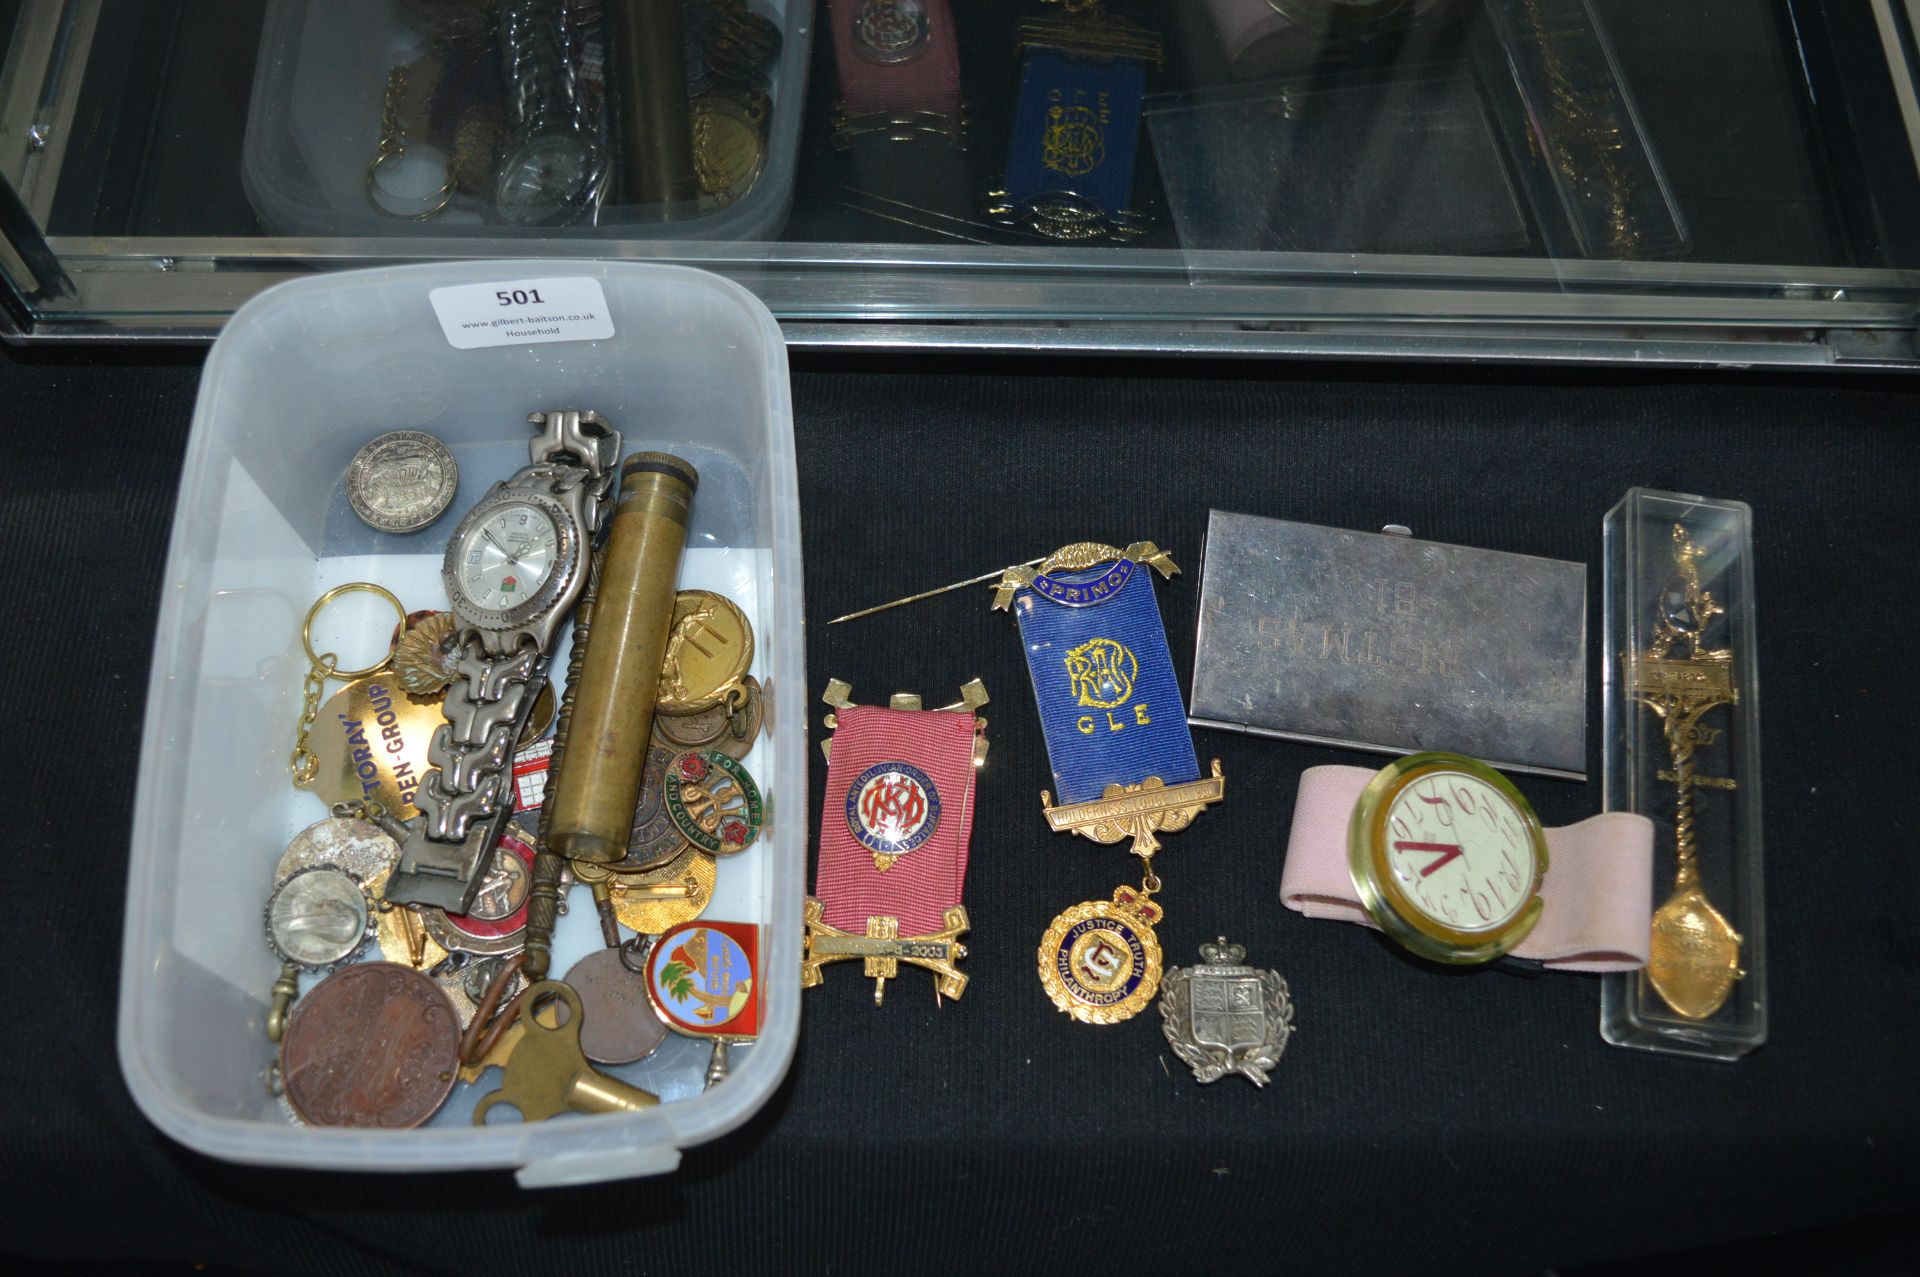 Small Collectibles; Watches, Medallions, etc.